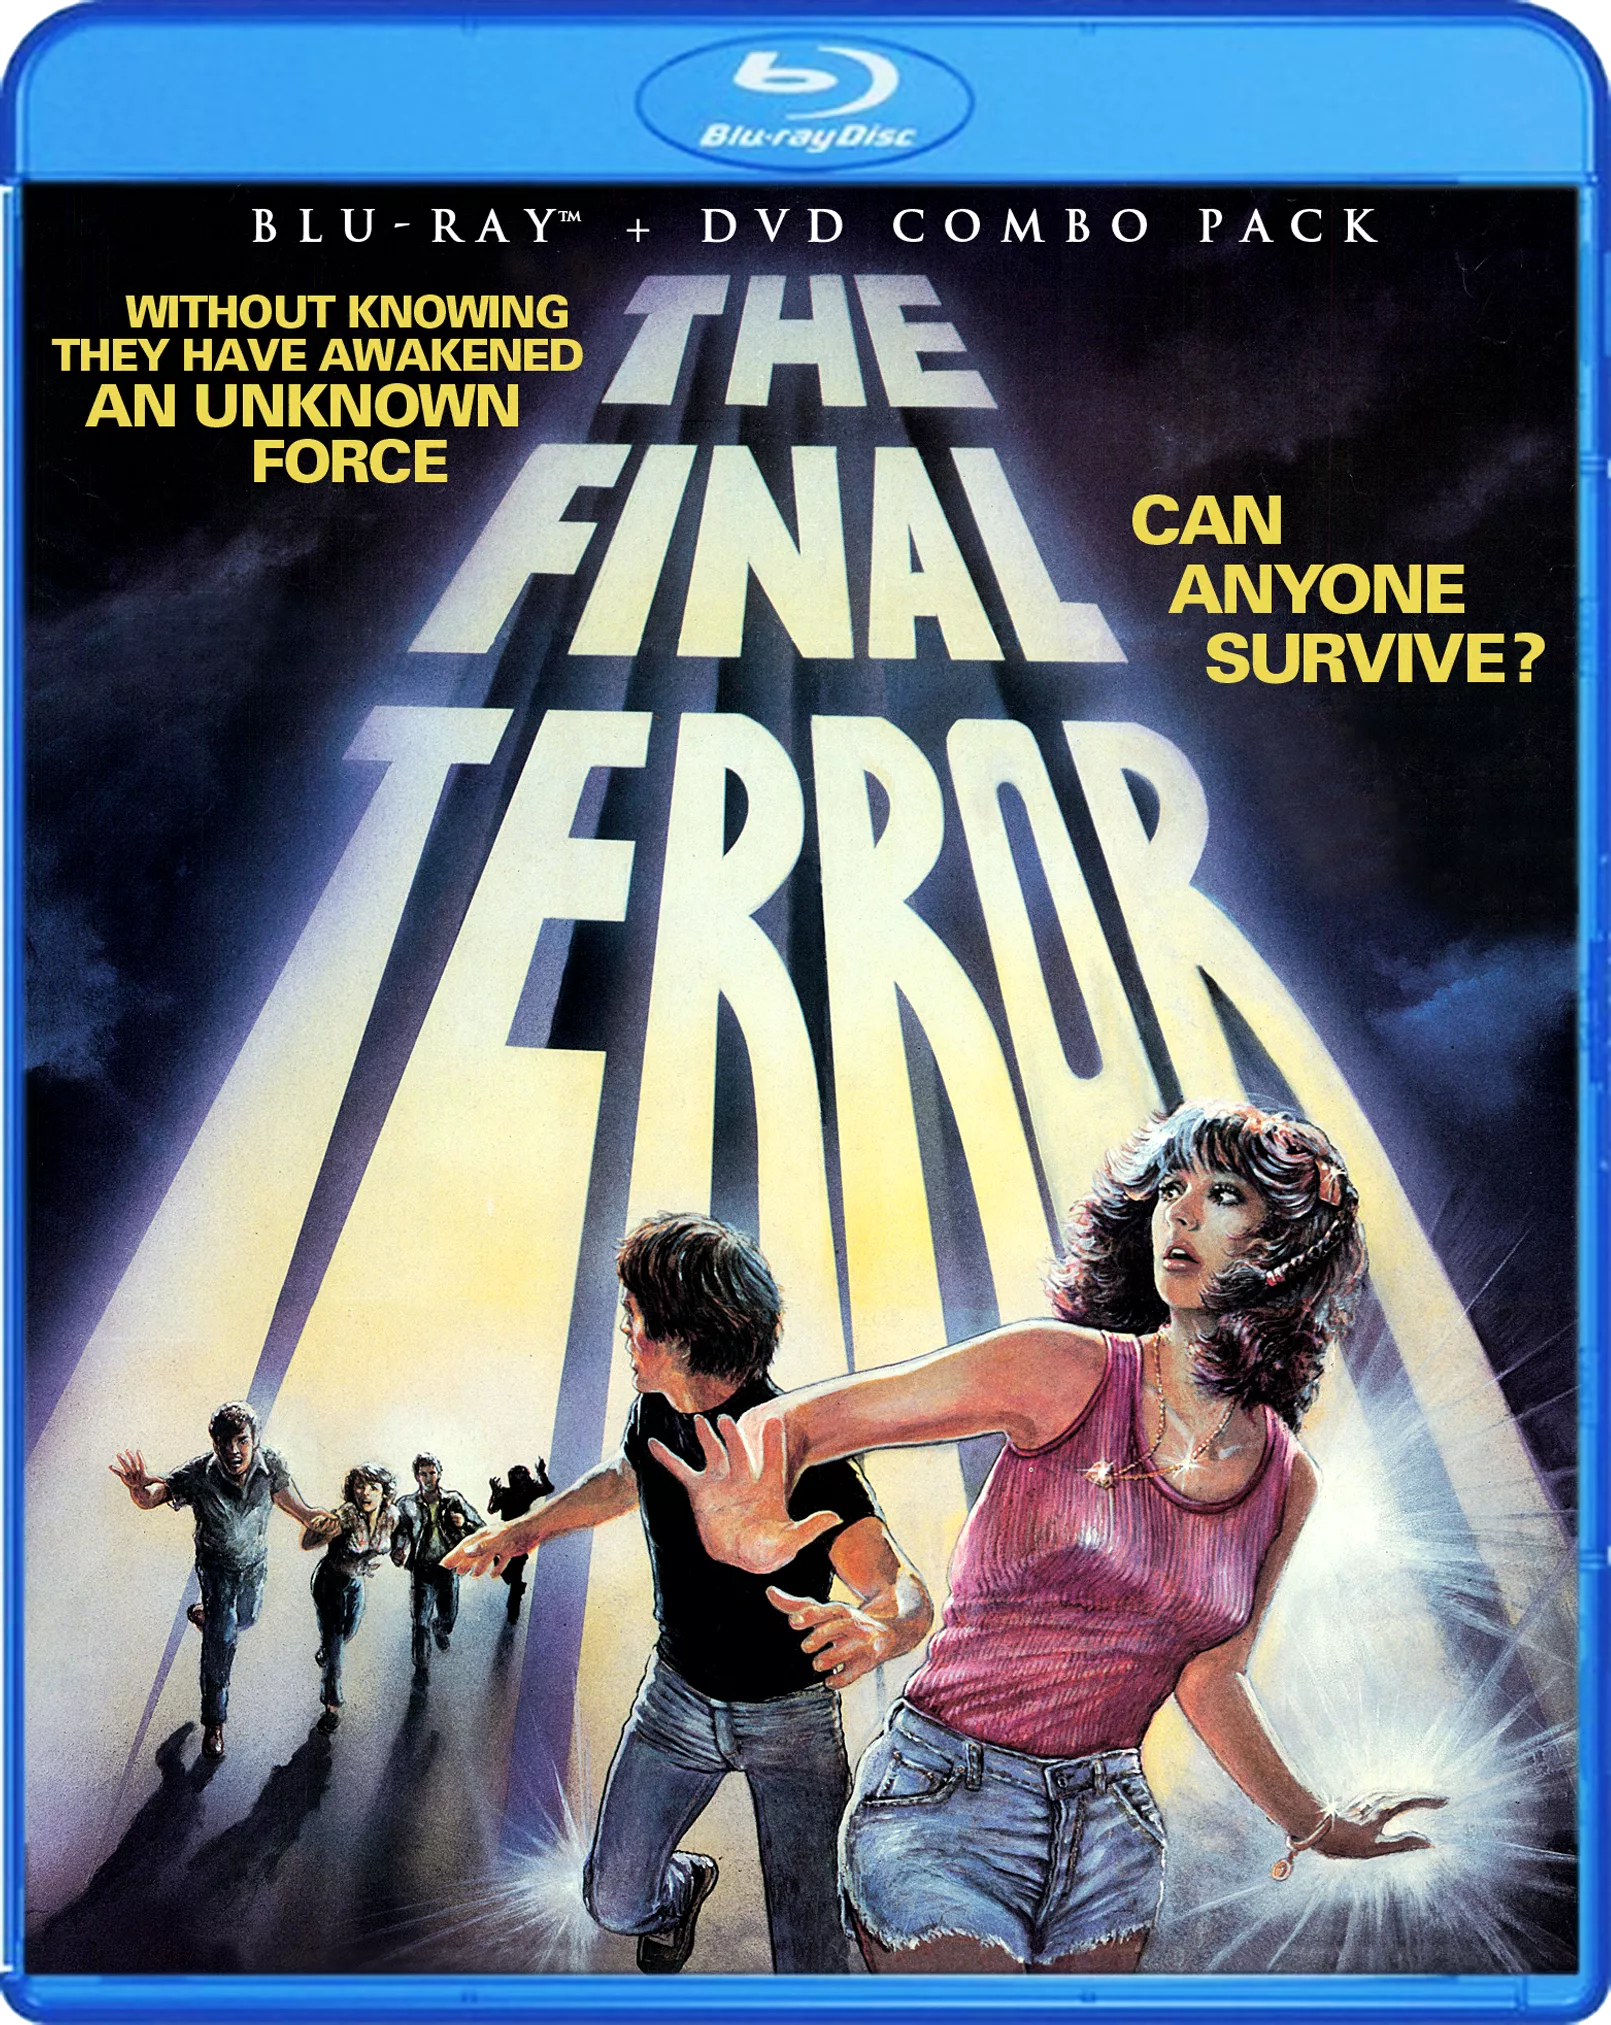 FinalTerrorCover300dpi.png